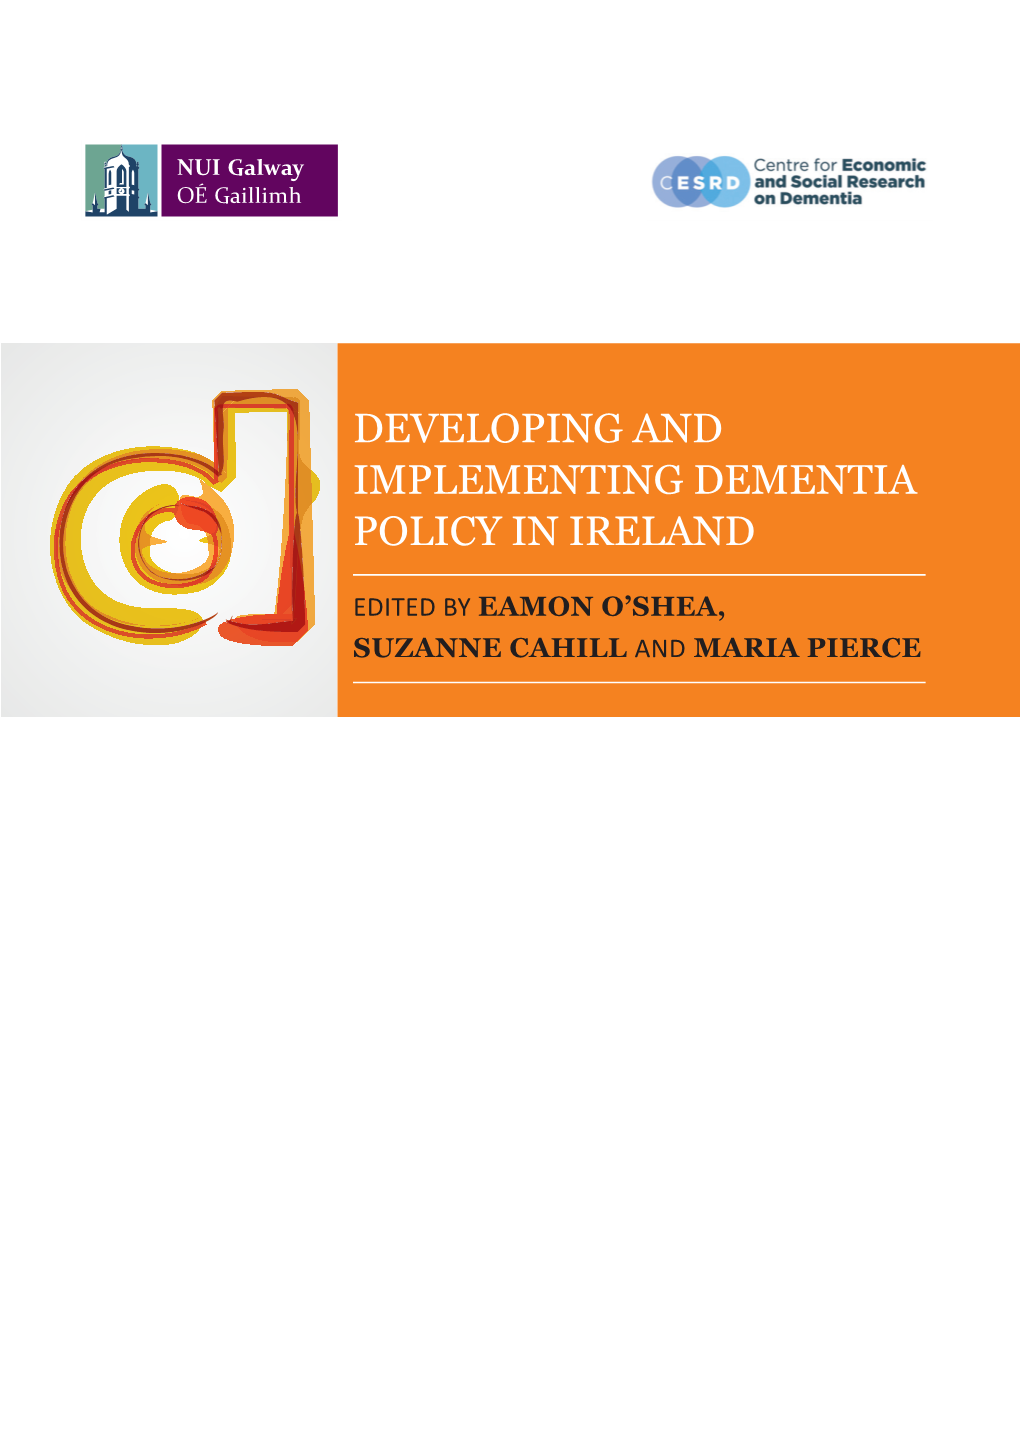 Developing and Implementing Dementia Policy in Ireland